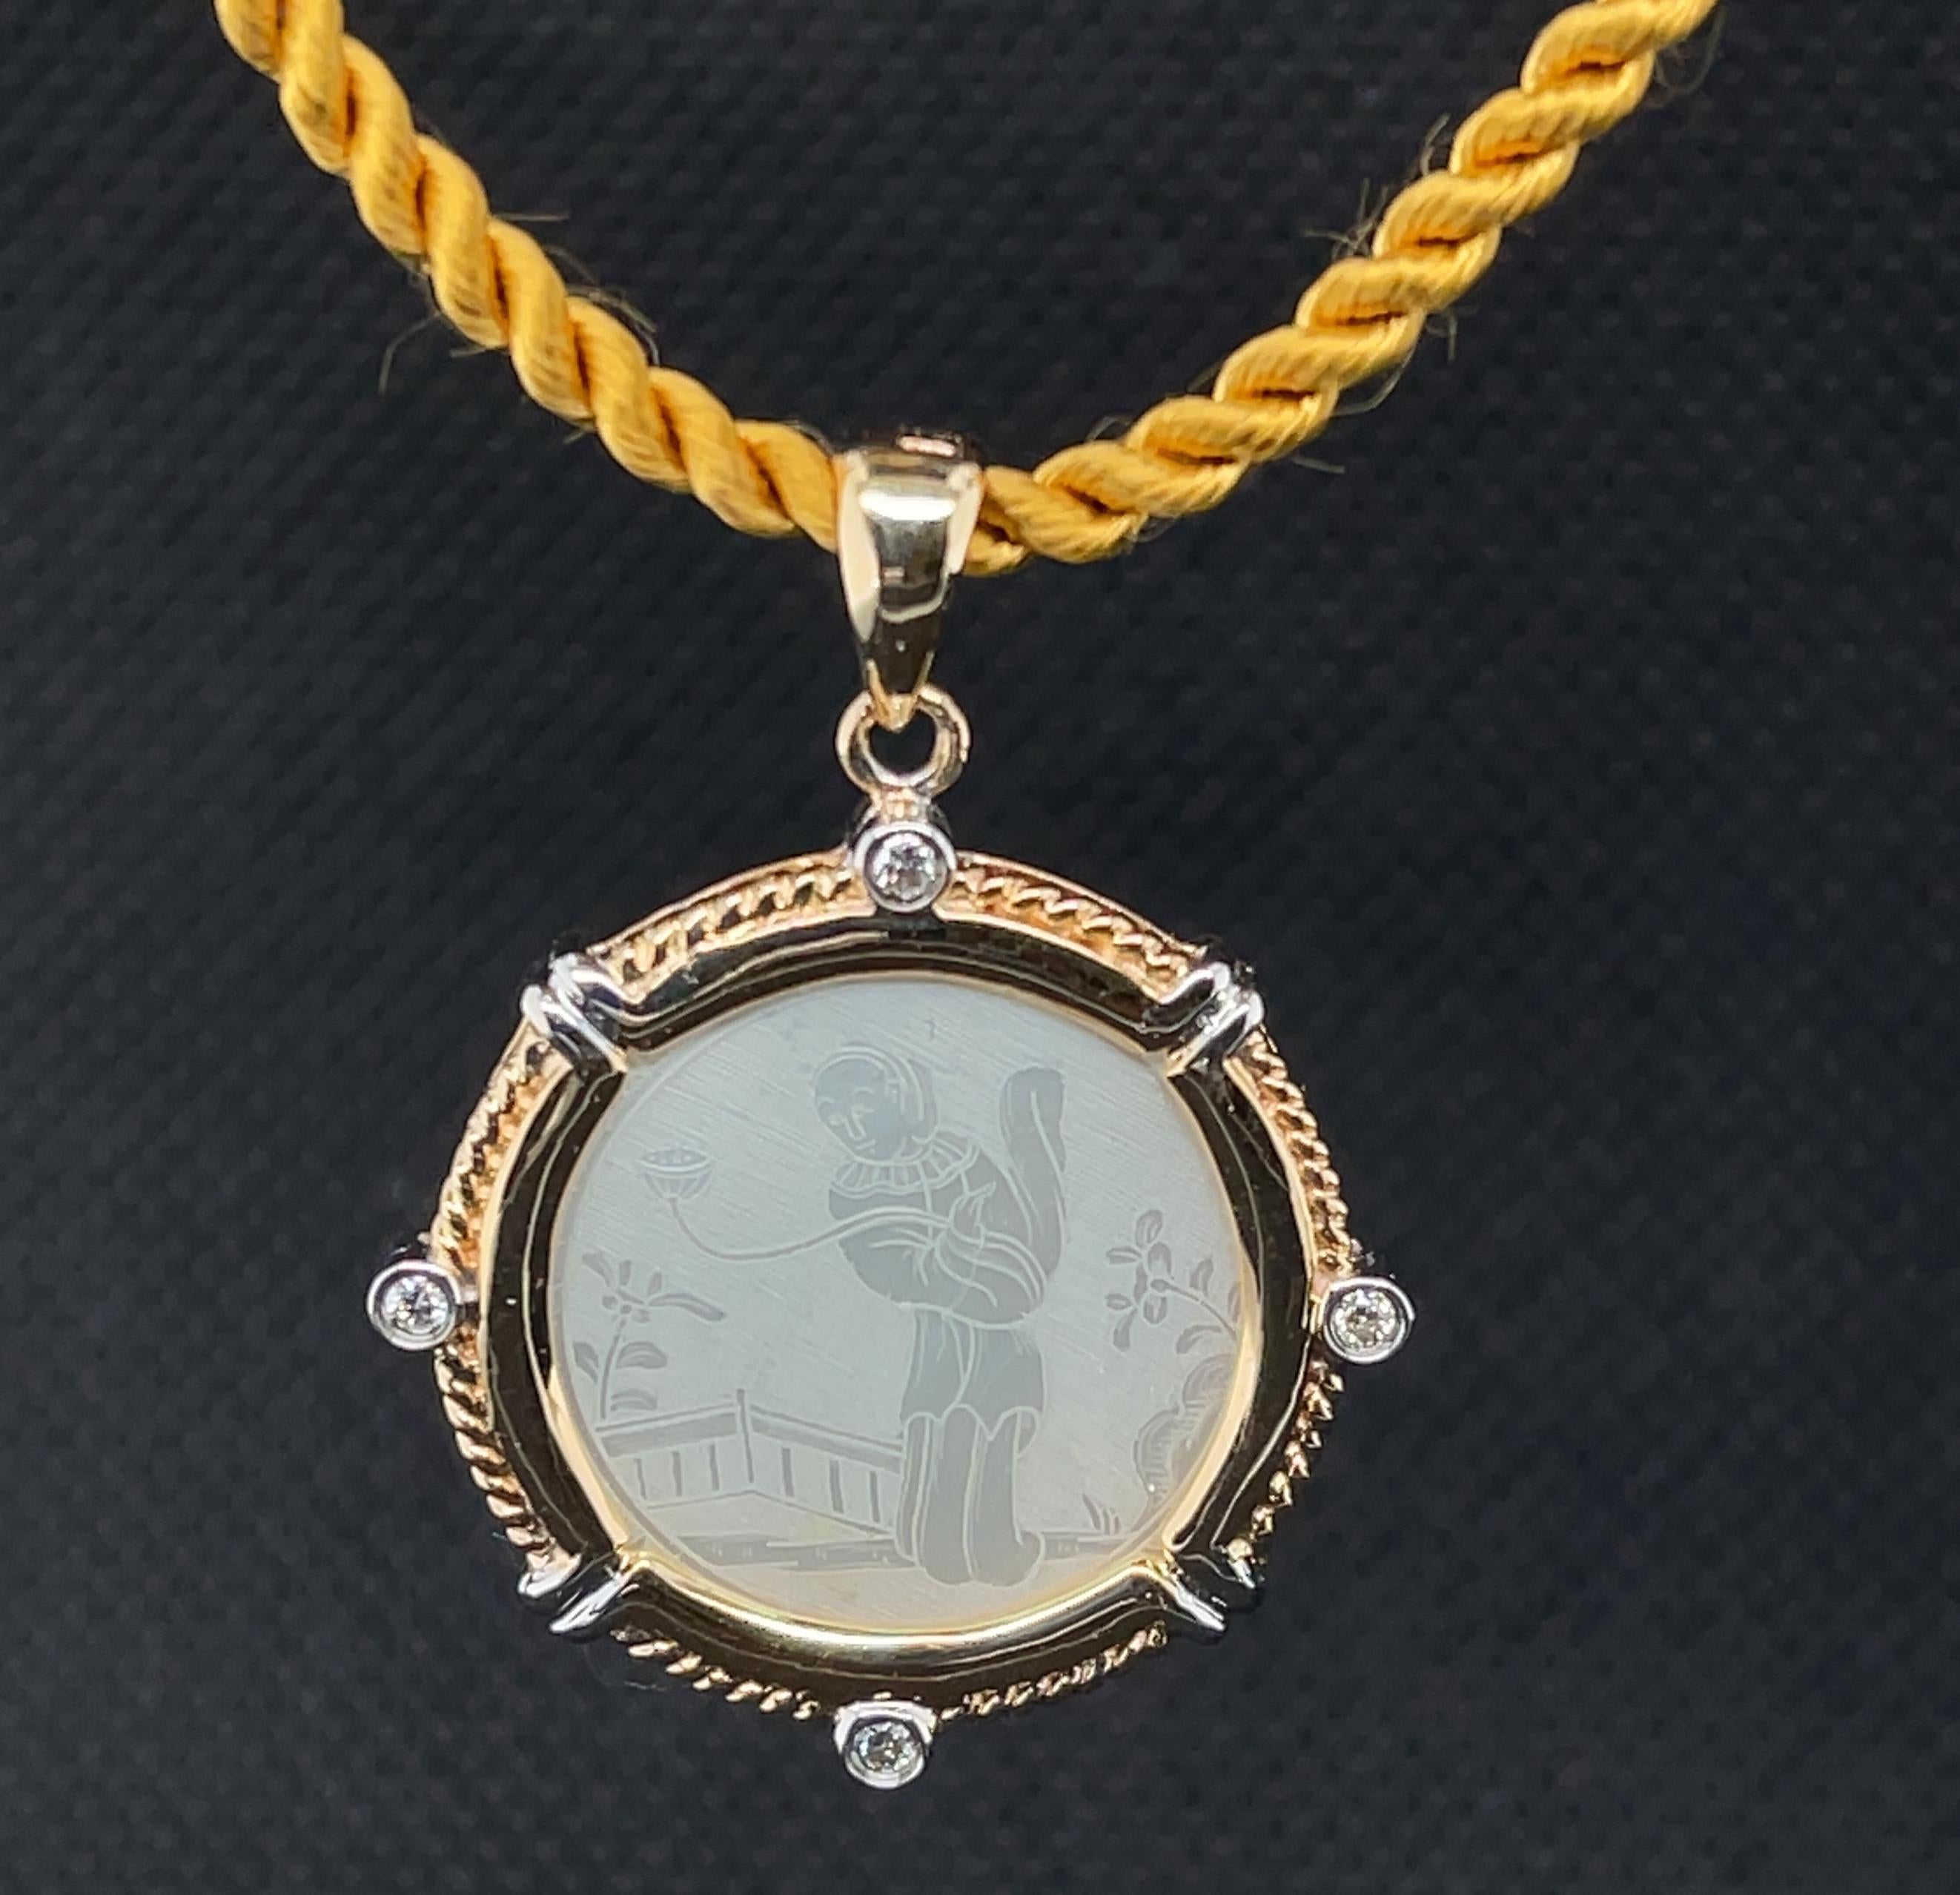 This pretty necklace features a fine-quality, antique mother-of-pearl gambling counter set in 14k yellow gold with diamonds. Gaming counters or 